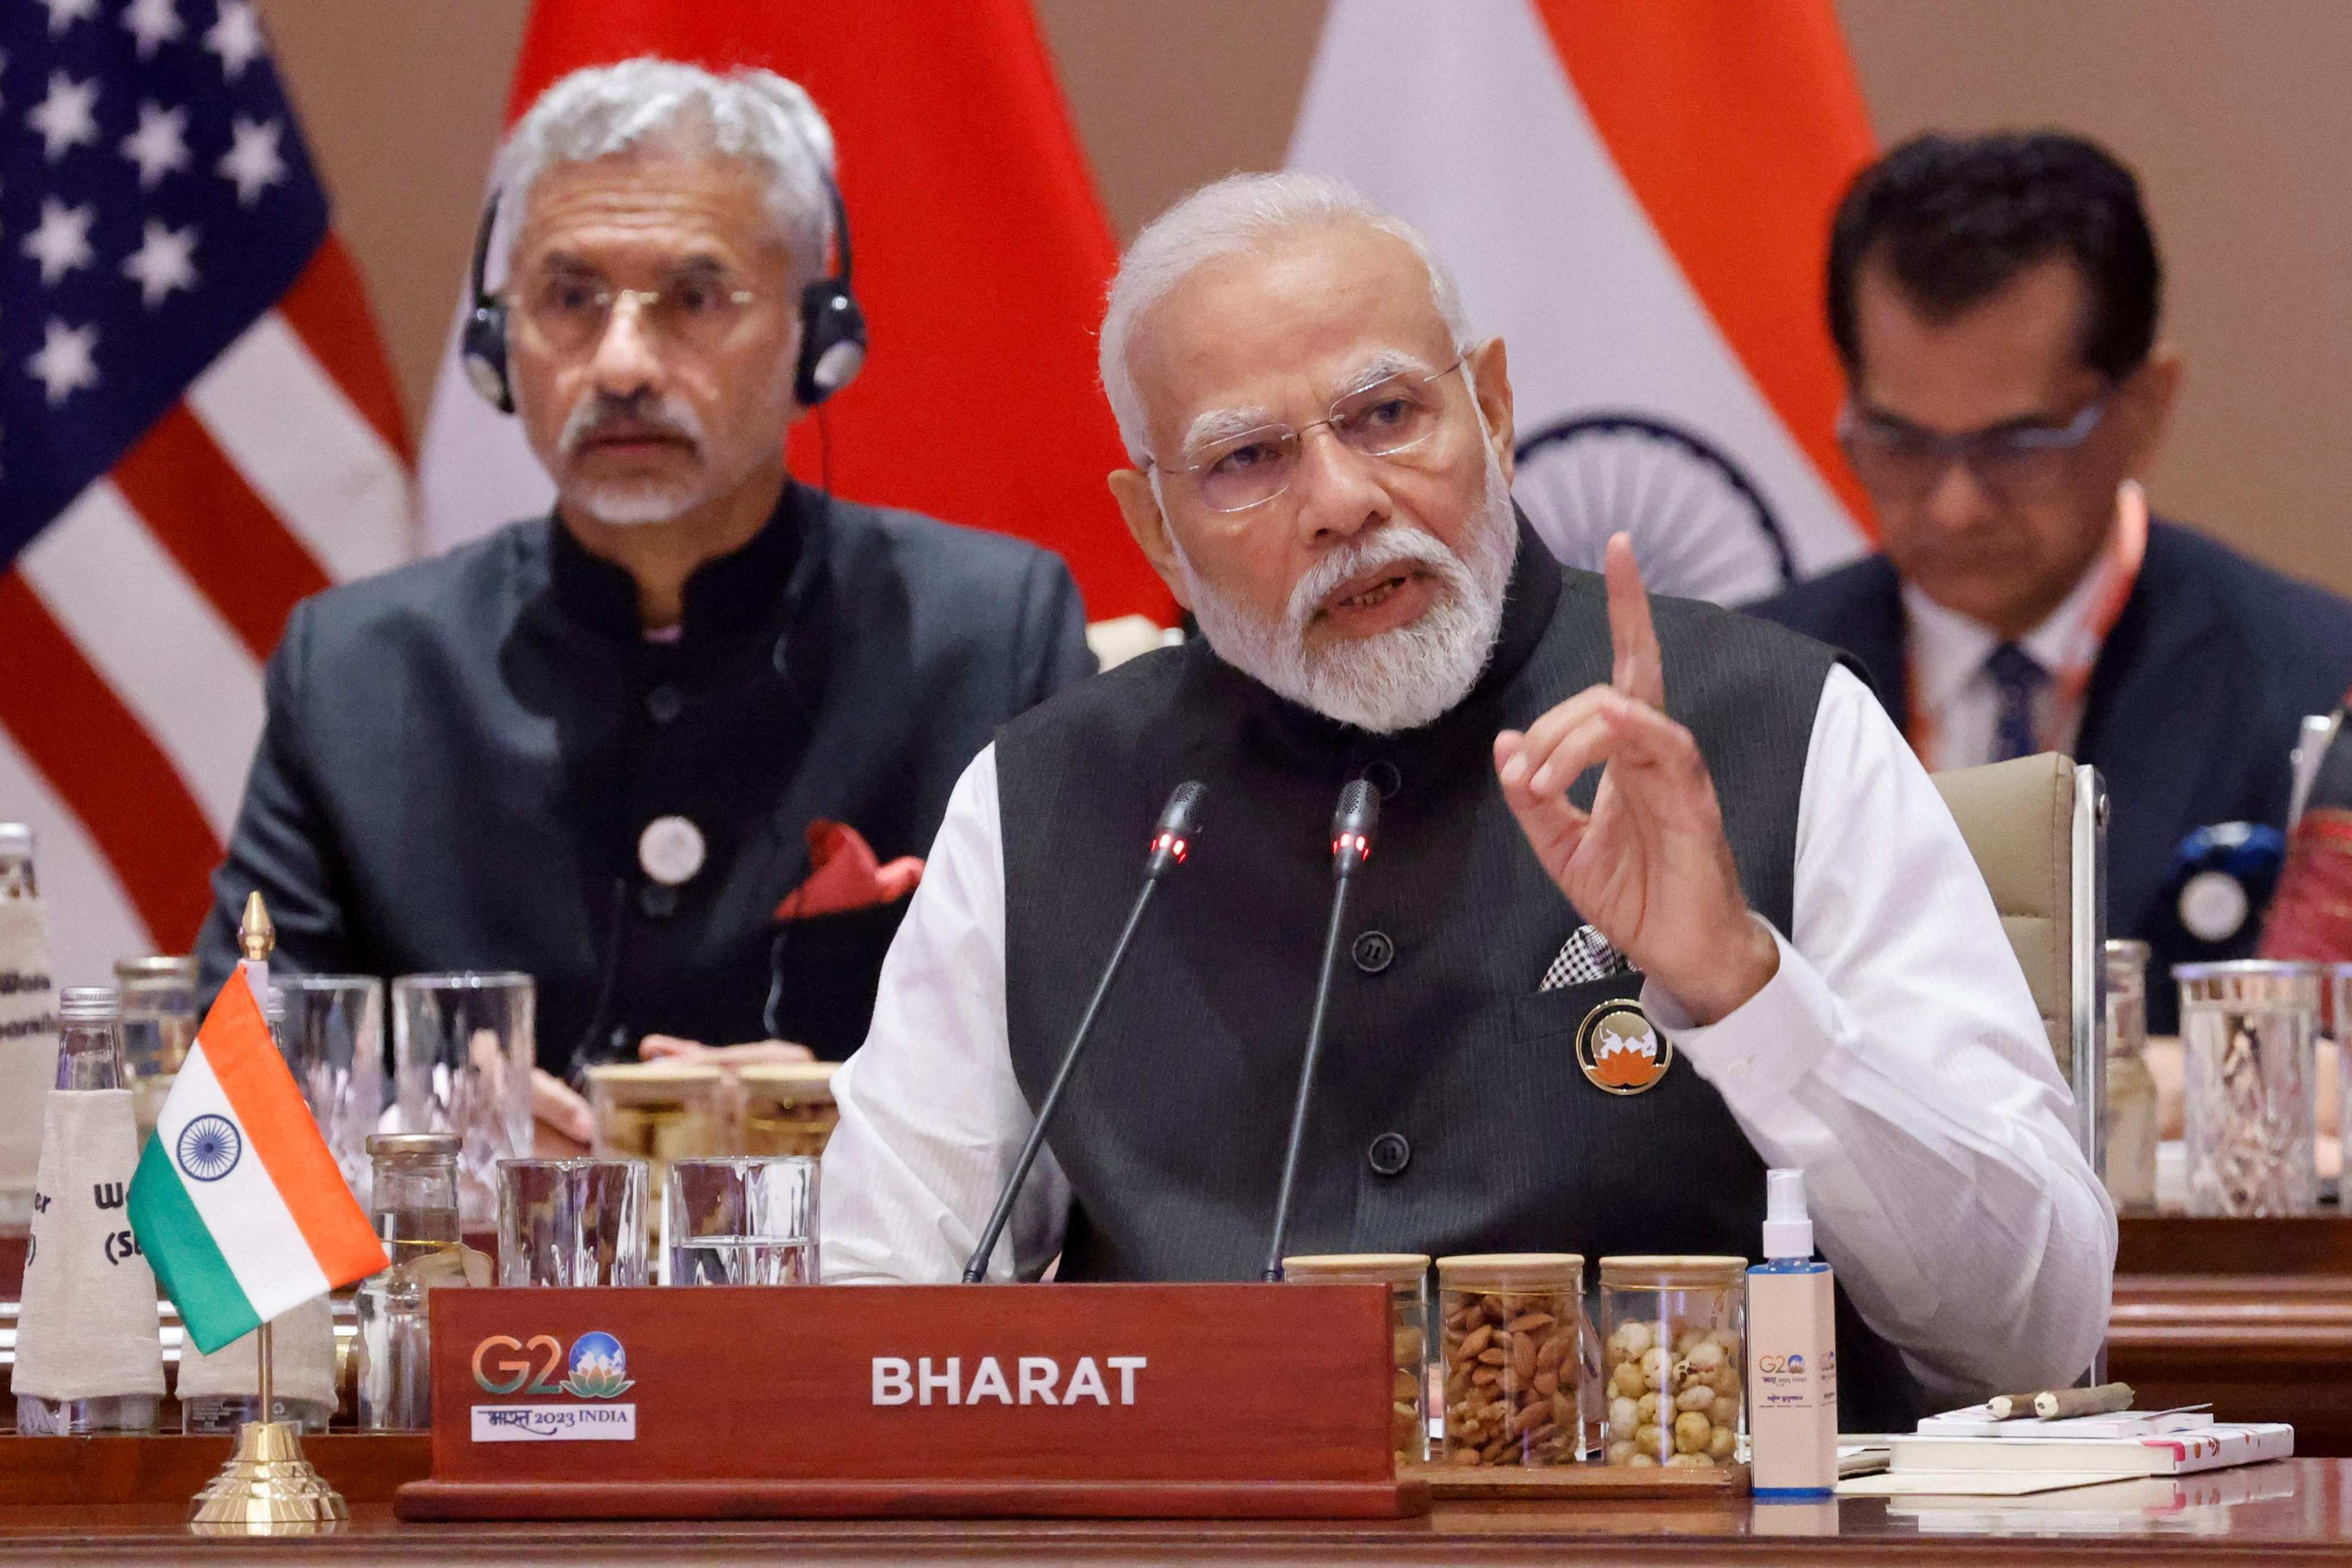 Indian Prime Minister Narendra Modi  speaks from a desk bearing the name Bharat during the G20 Leaders’ Summit in New Delhi on September 9. Photo: Pool/AFP